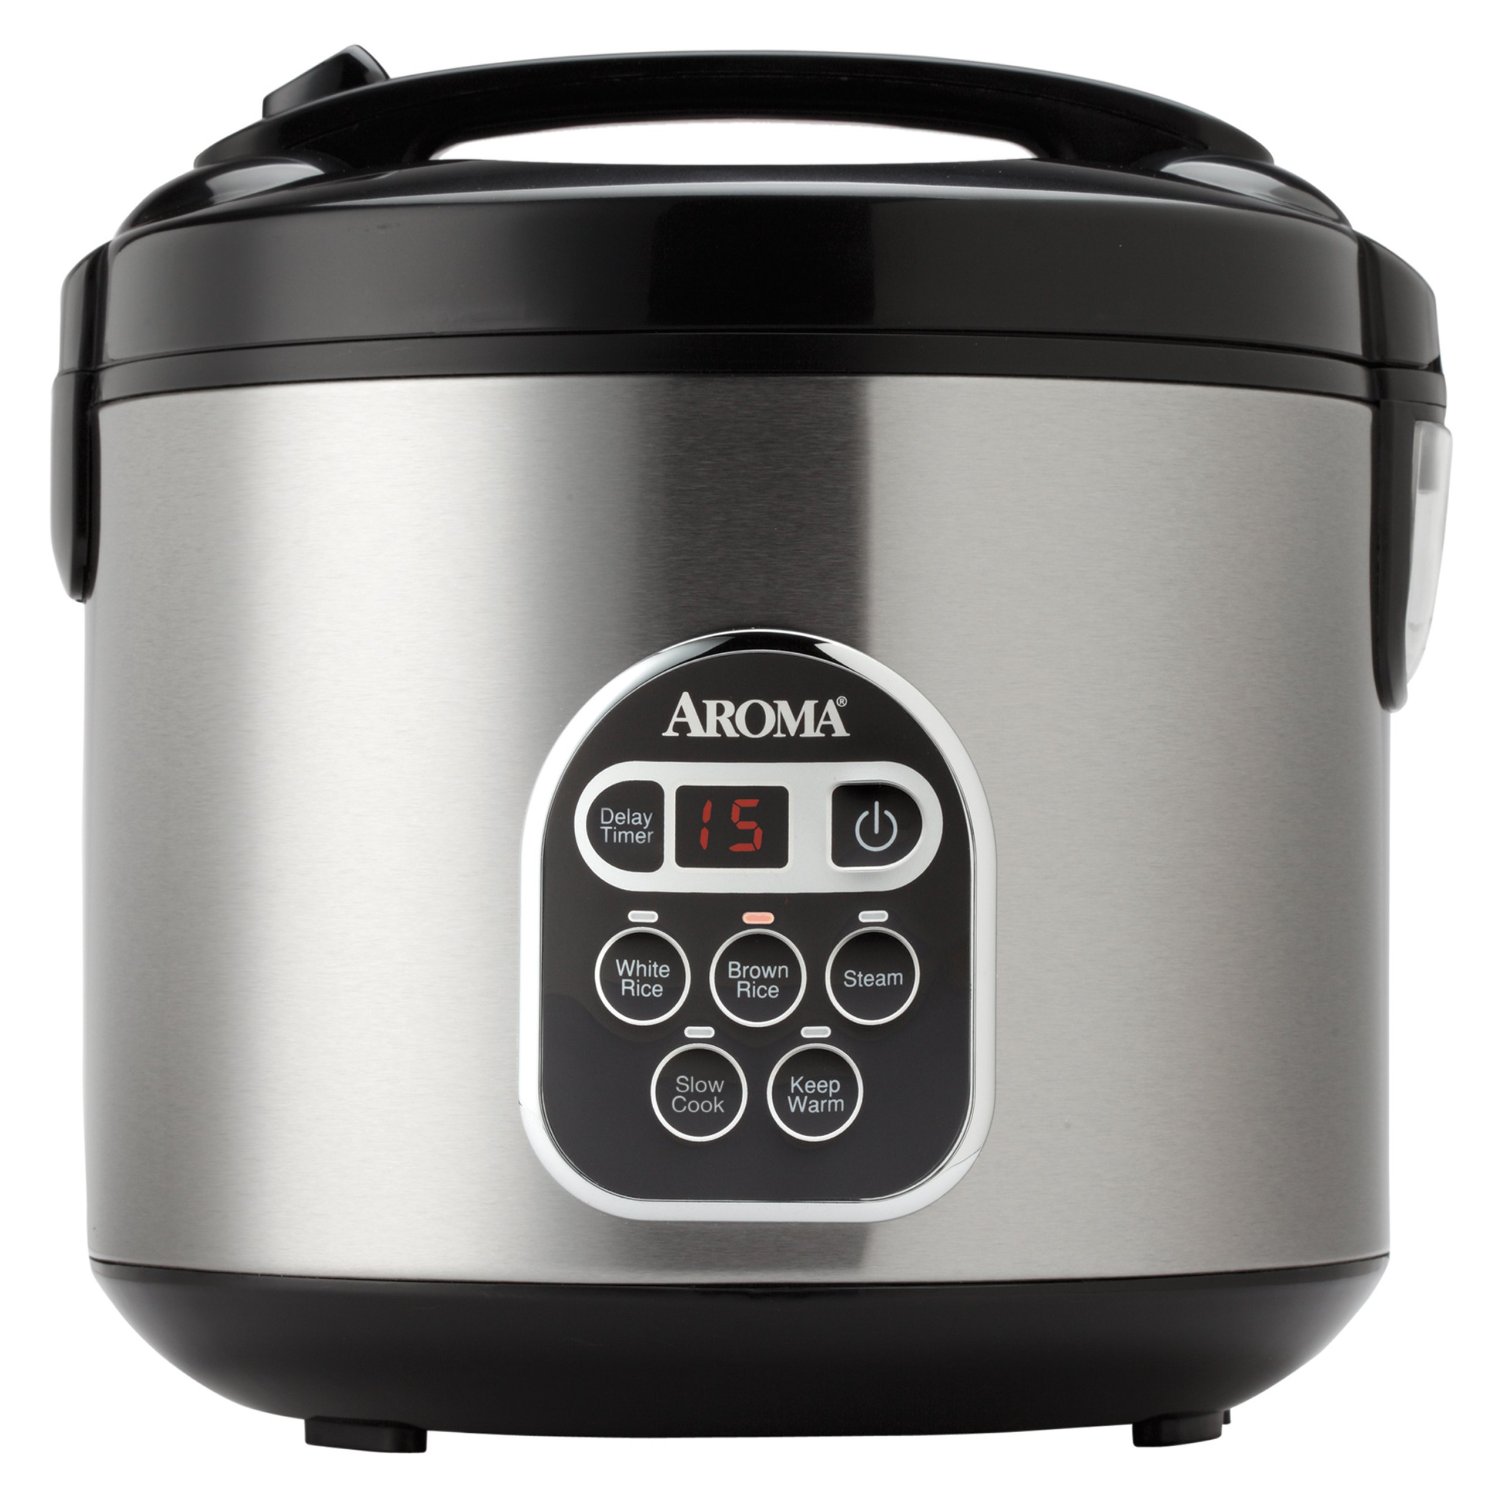 Aroma 20-cup Rice Cooker Manual